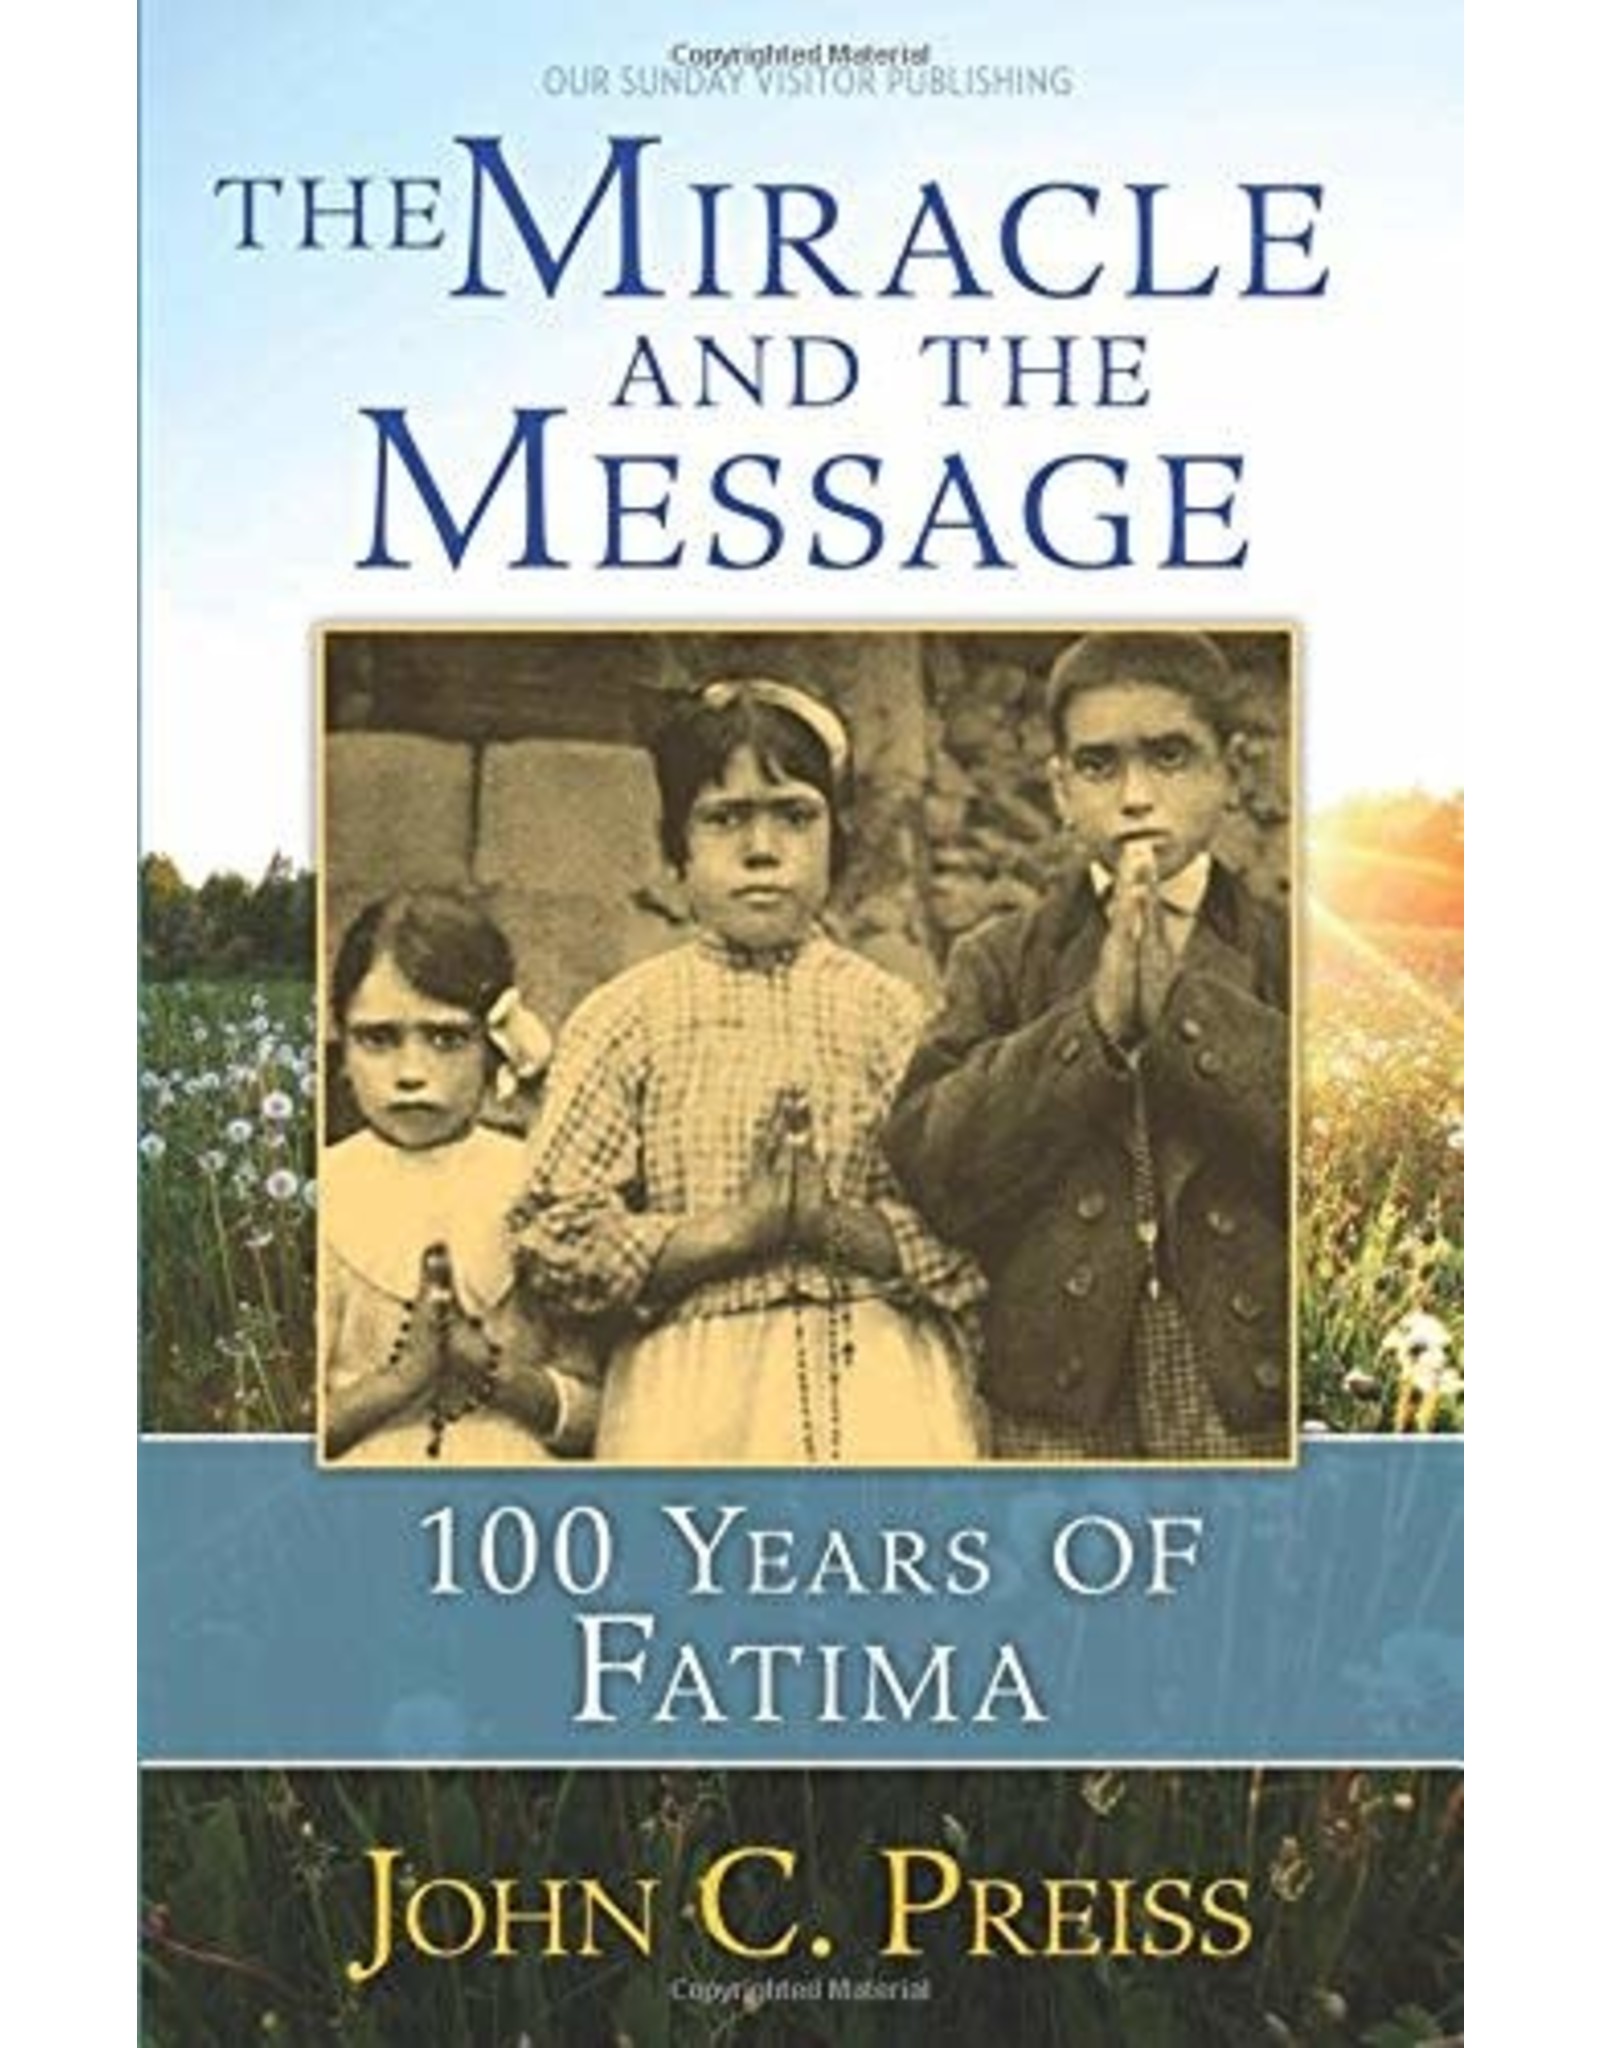 OSV (Our Sunday Visitor) The Miracle and the Message: 100 Years of Fatima